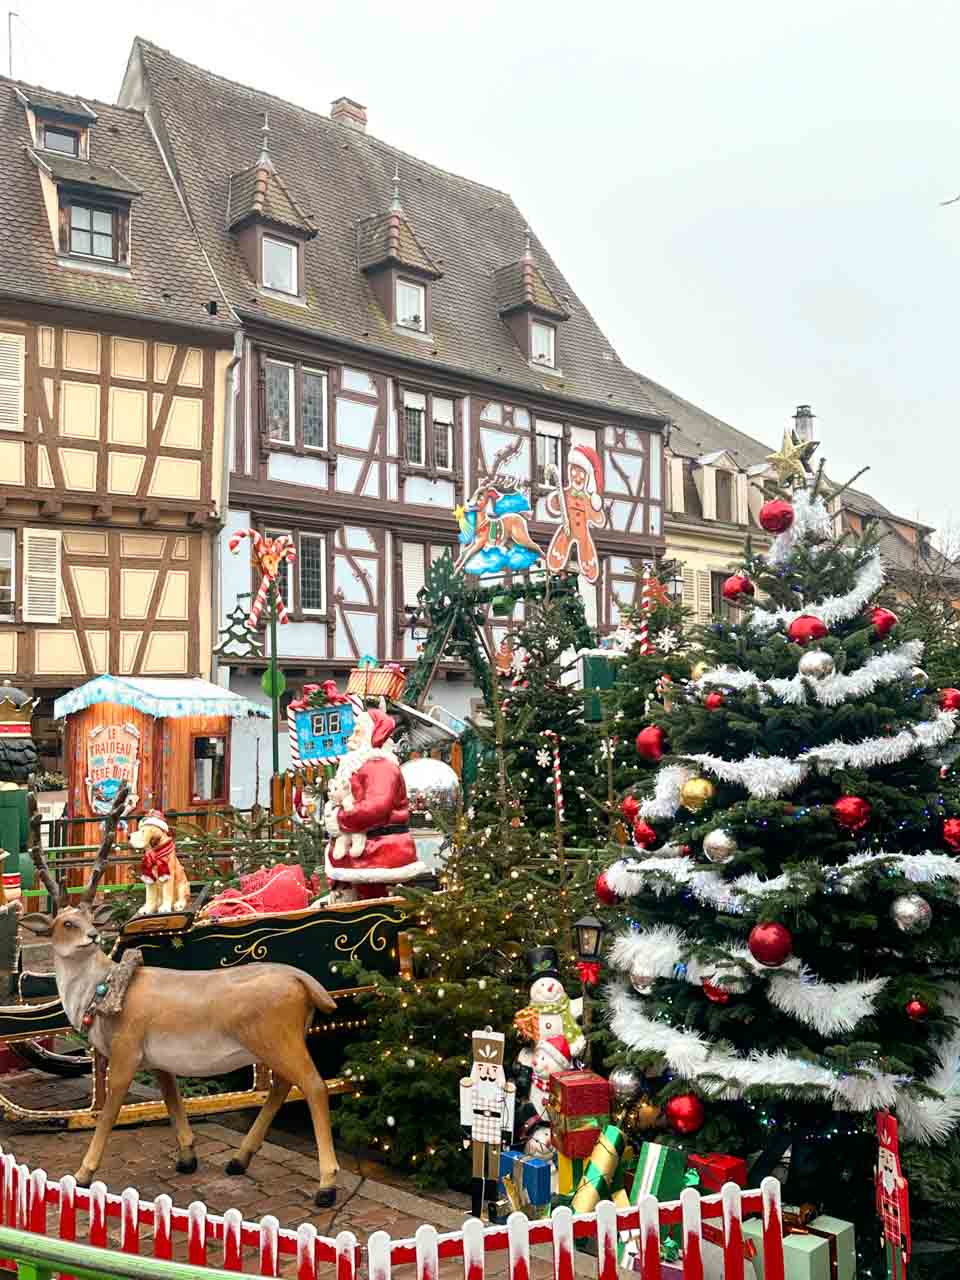 A vibrant Christmas display in Colmar featuring a decorated tree, a life-size Santa in a sleigh, and festive figures, with traditional half-timbered houses in the background